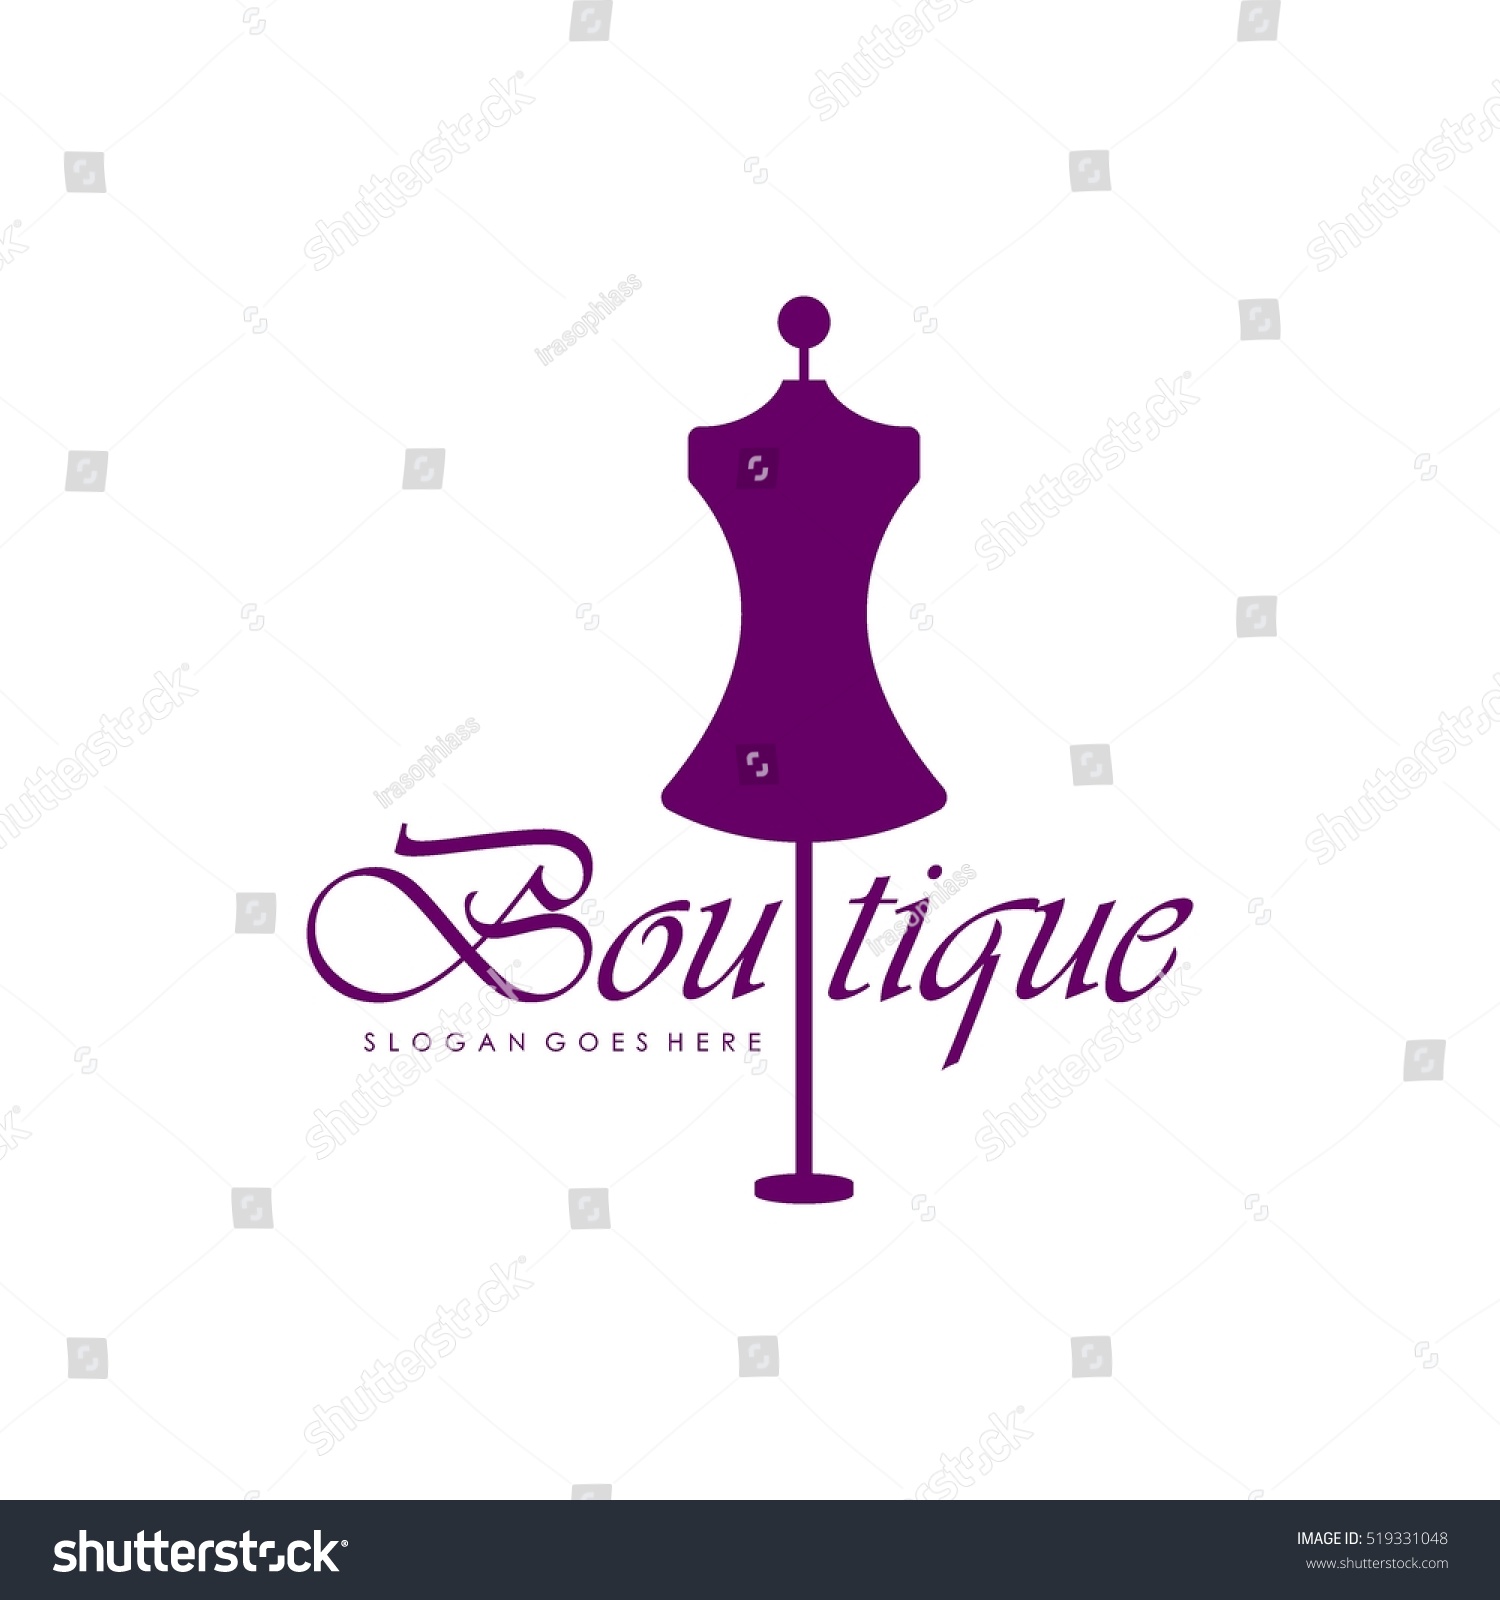 Boutique Beauty Logo Series Stock Vector (Royalty Free) 519331048 ...